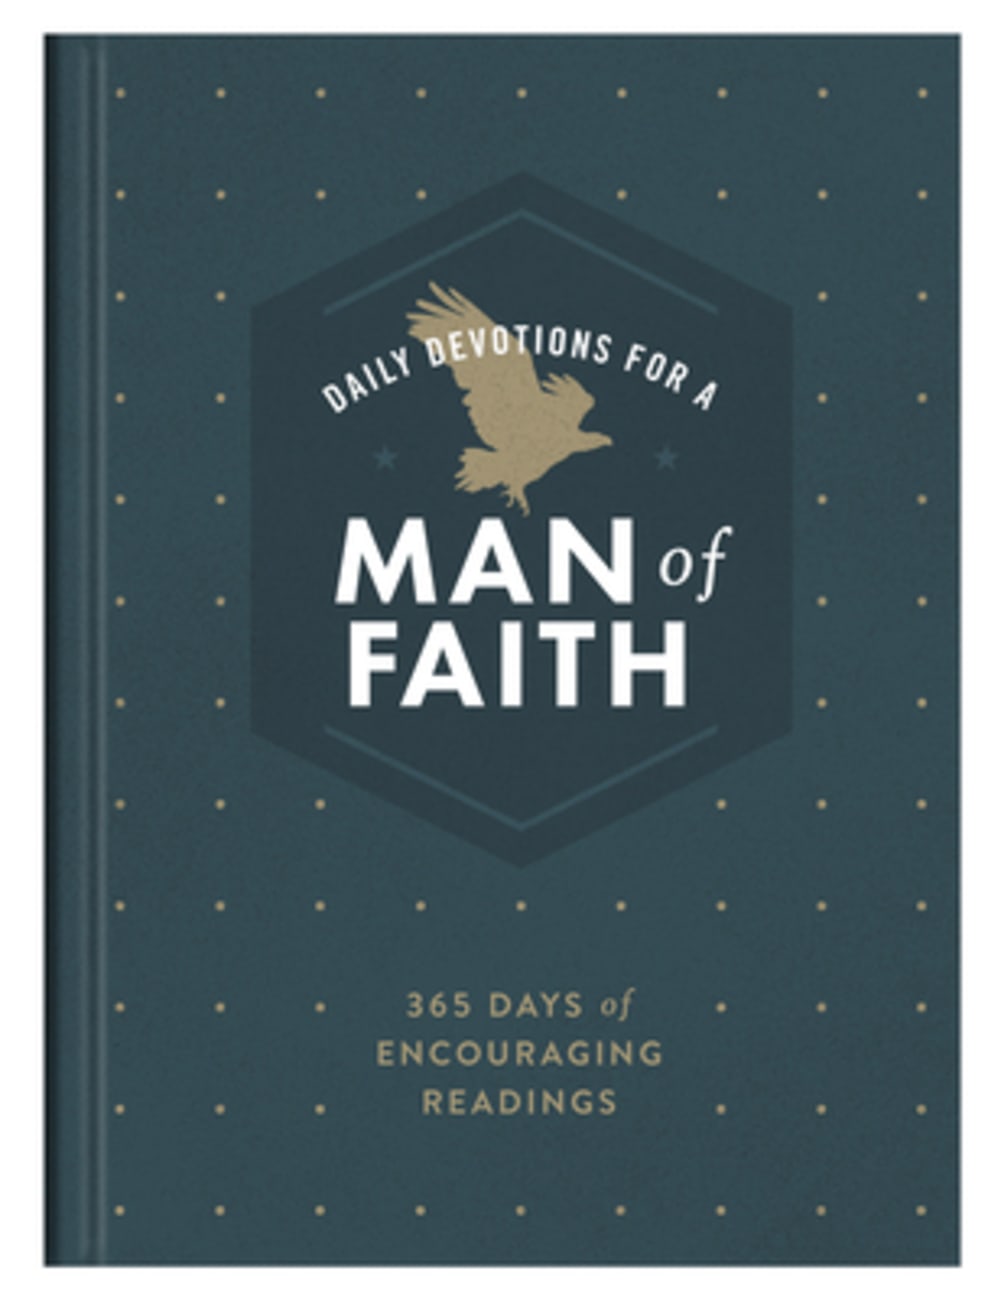 Daily Devotions For a Man of Faith: 365 Days of Encouraging Readings Hardback